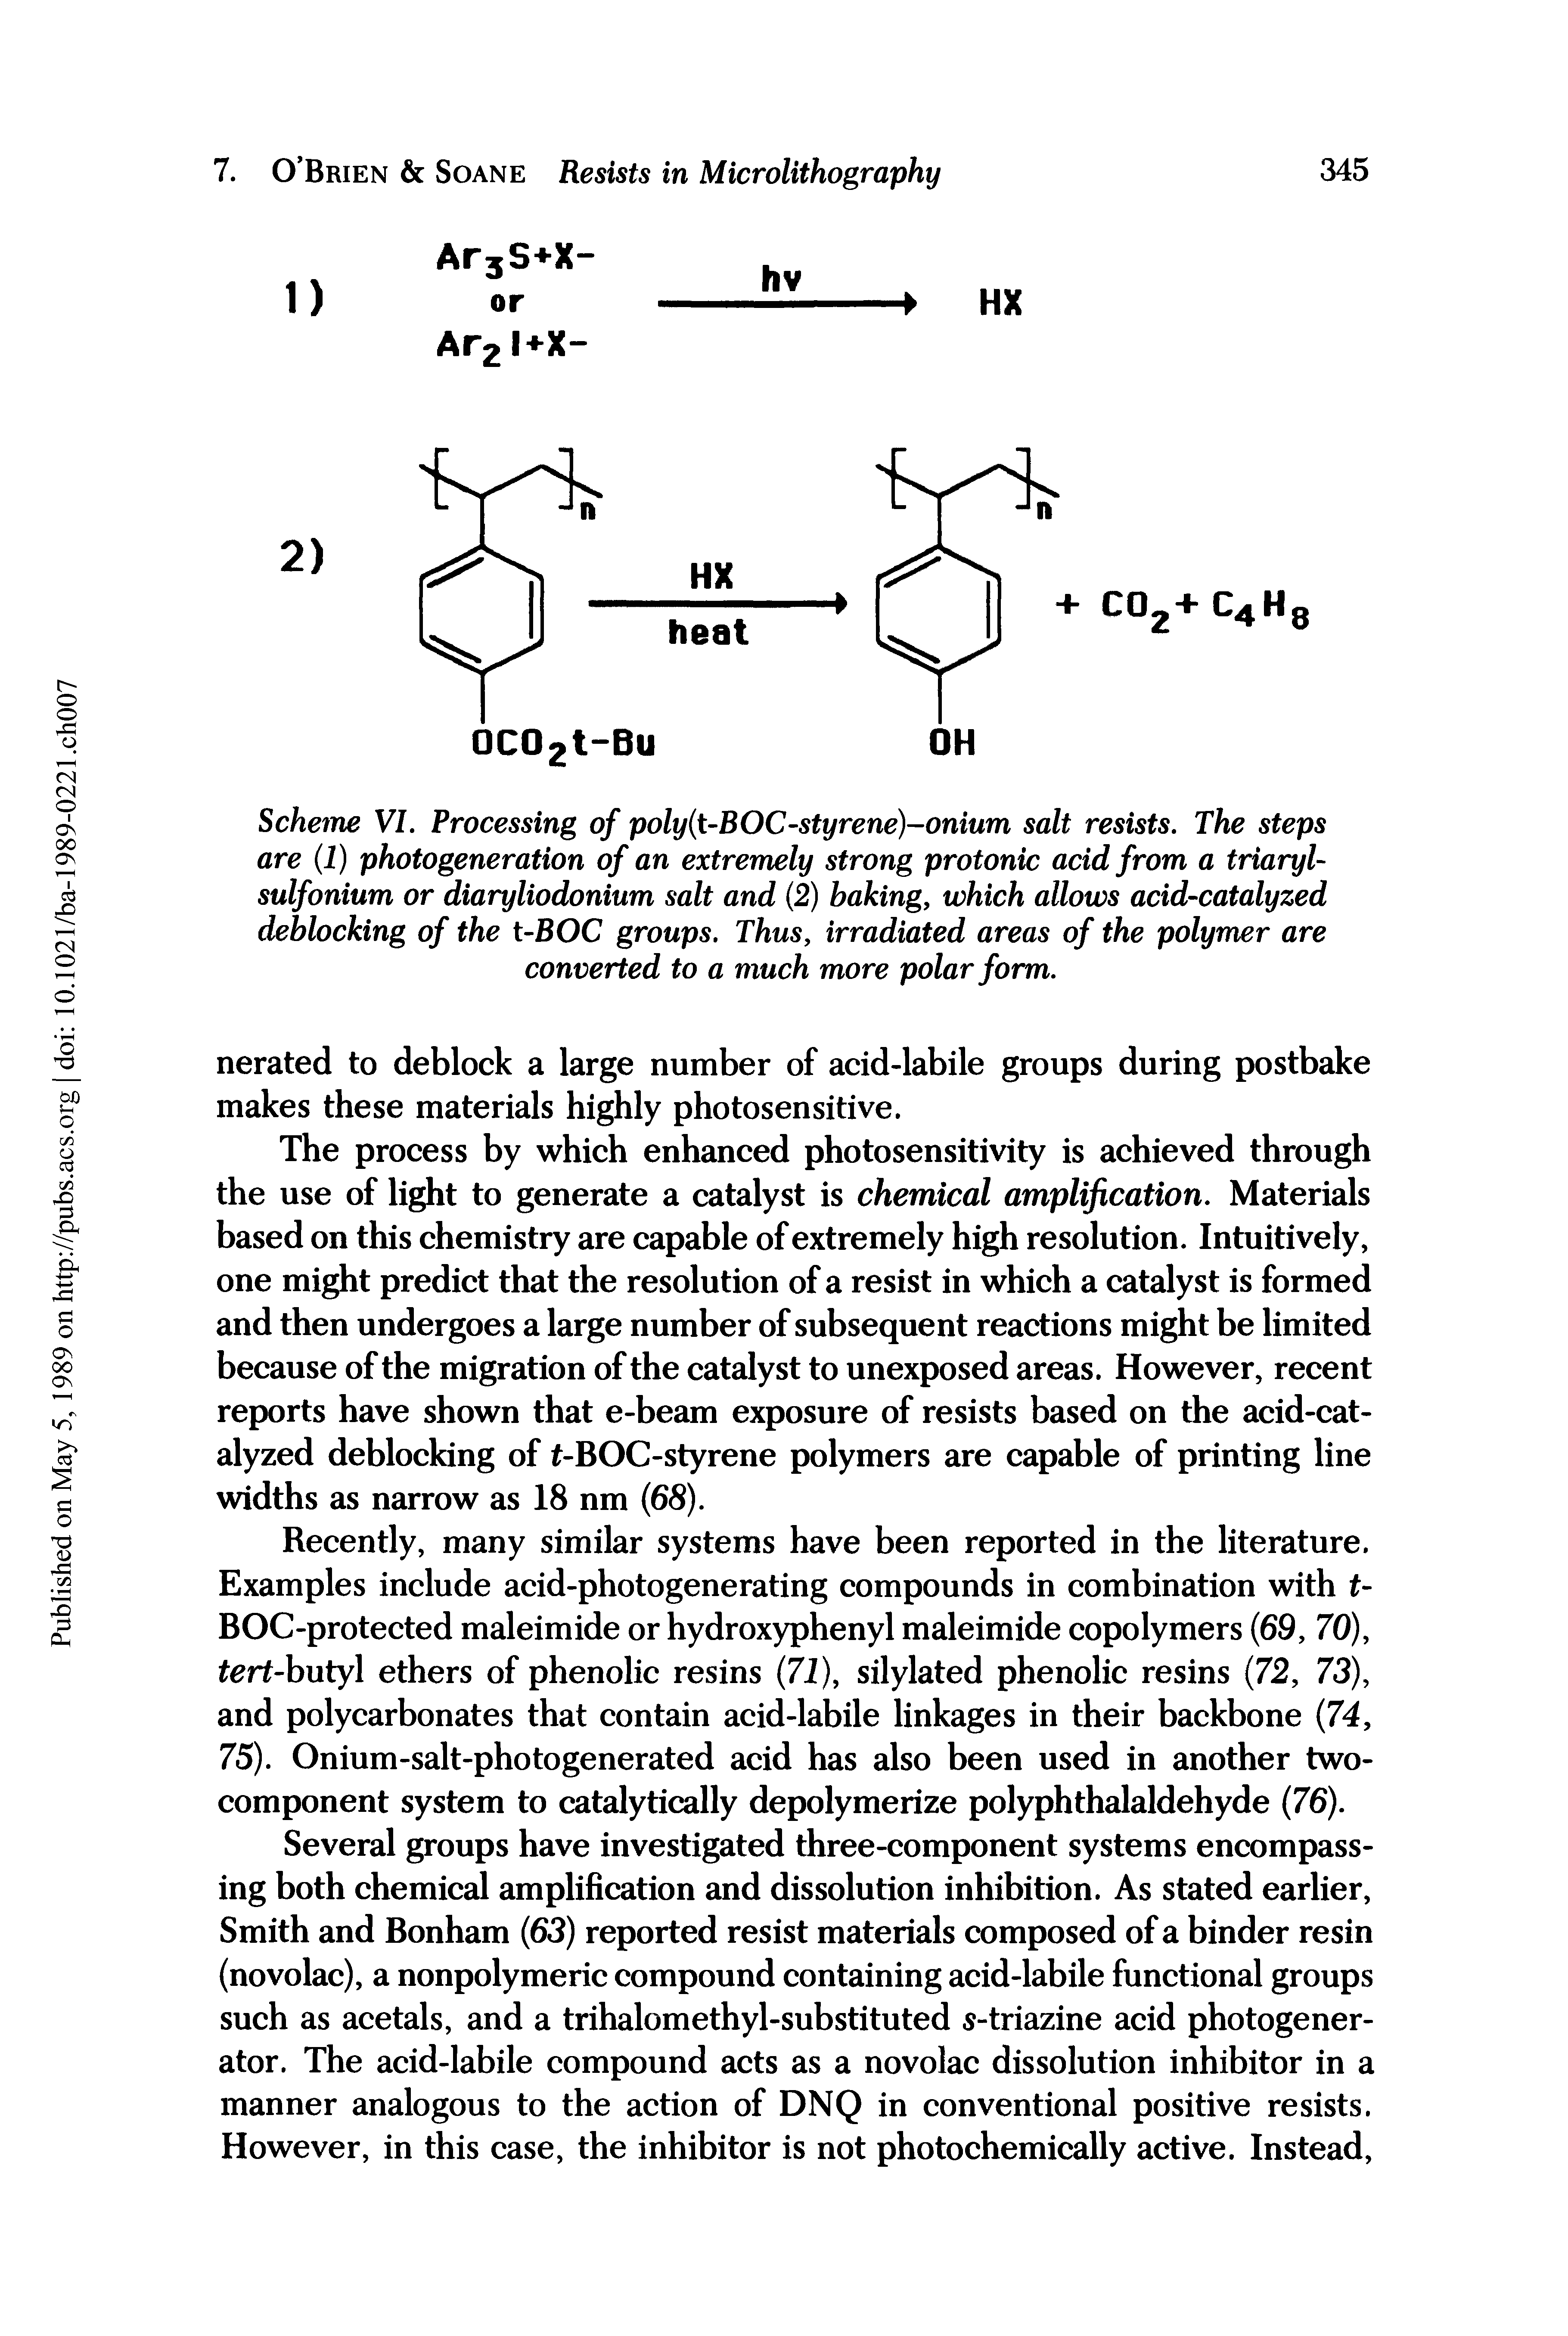 Scheme VI. Processing of poly(t-BOC-styrene)-onium salt resists. The steps are (1) photogeneration of an extremely strong protonic acid from a triaryl-sulfonium or diaryliodonium salt and (2) baking, which allows acid-catalyzed deblocking of the t-BOC groups. Thus, irradiated areas of the polymer are converted to a much more polar form.